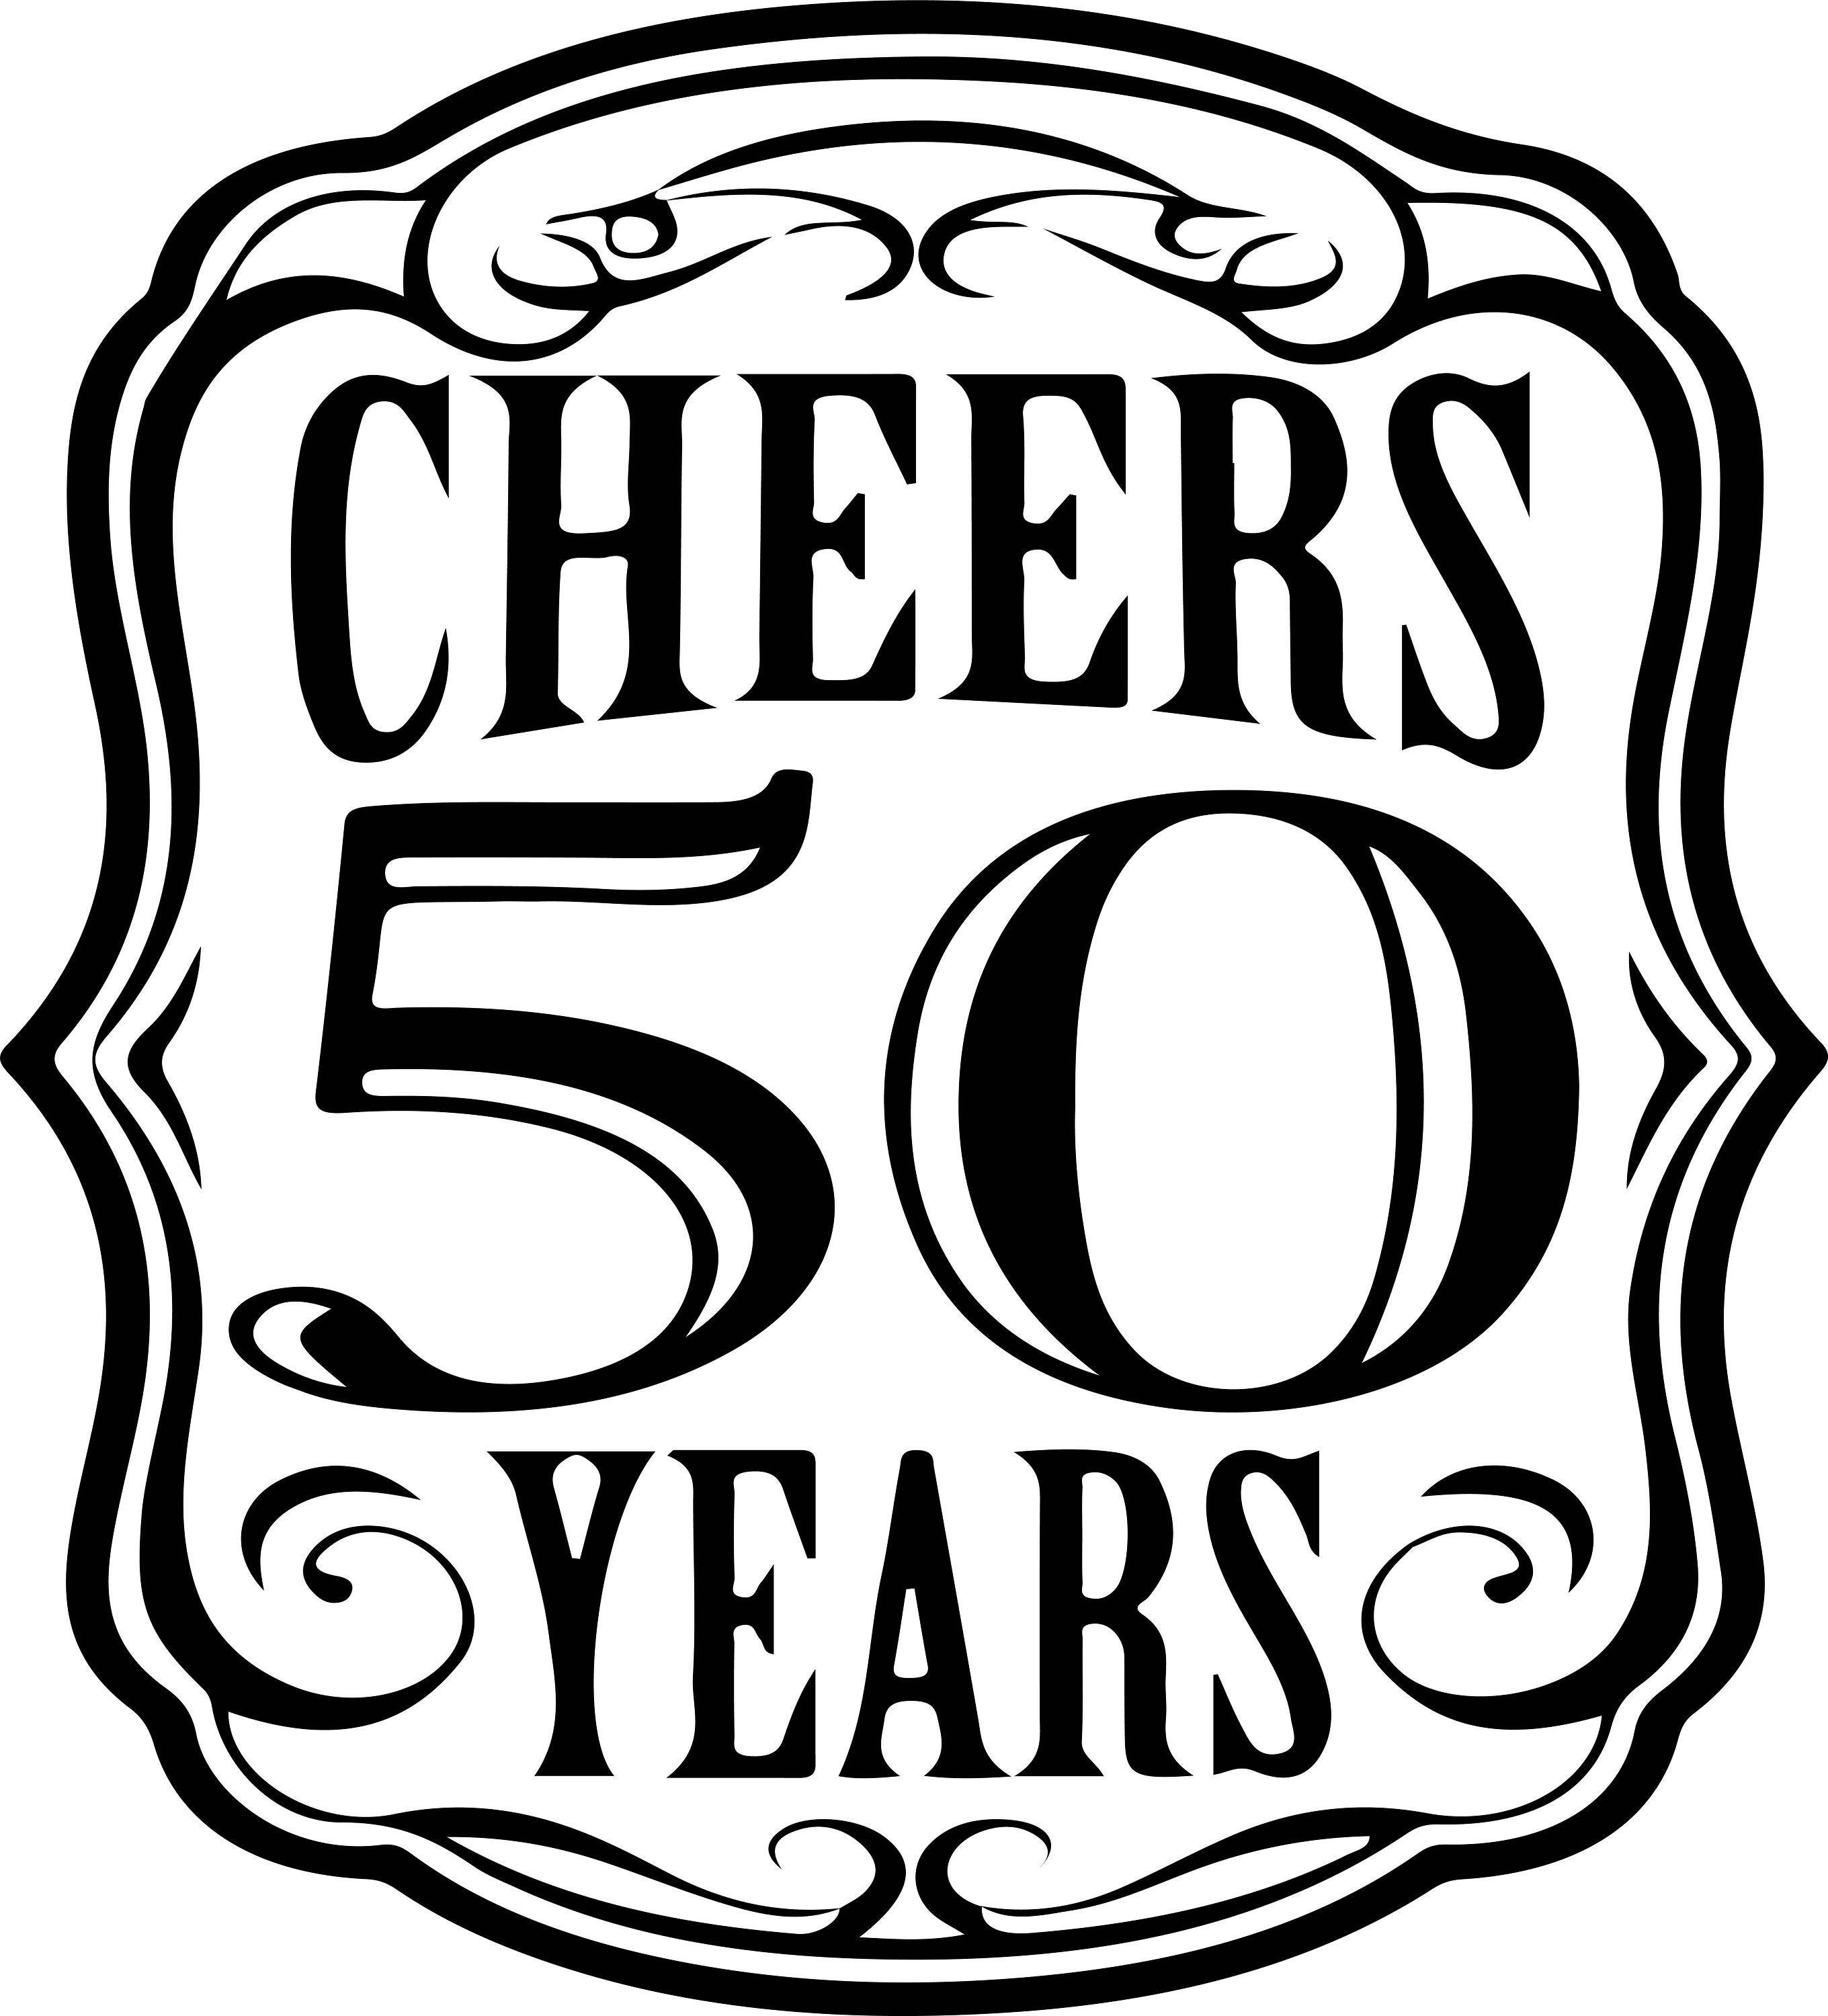 cheers-to-50-years-svgpngjpegepsdxfai-pdf-etsy